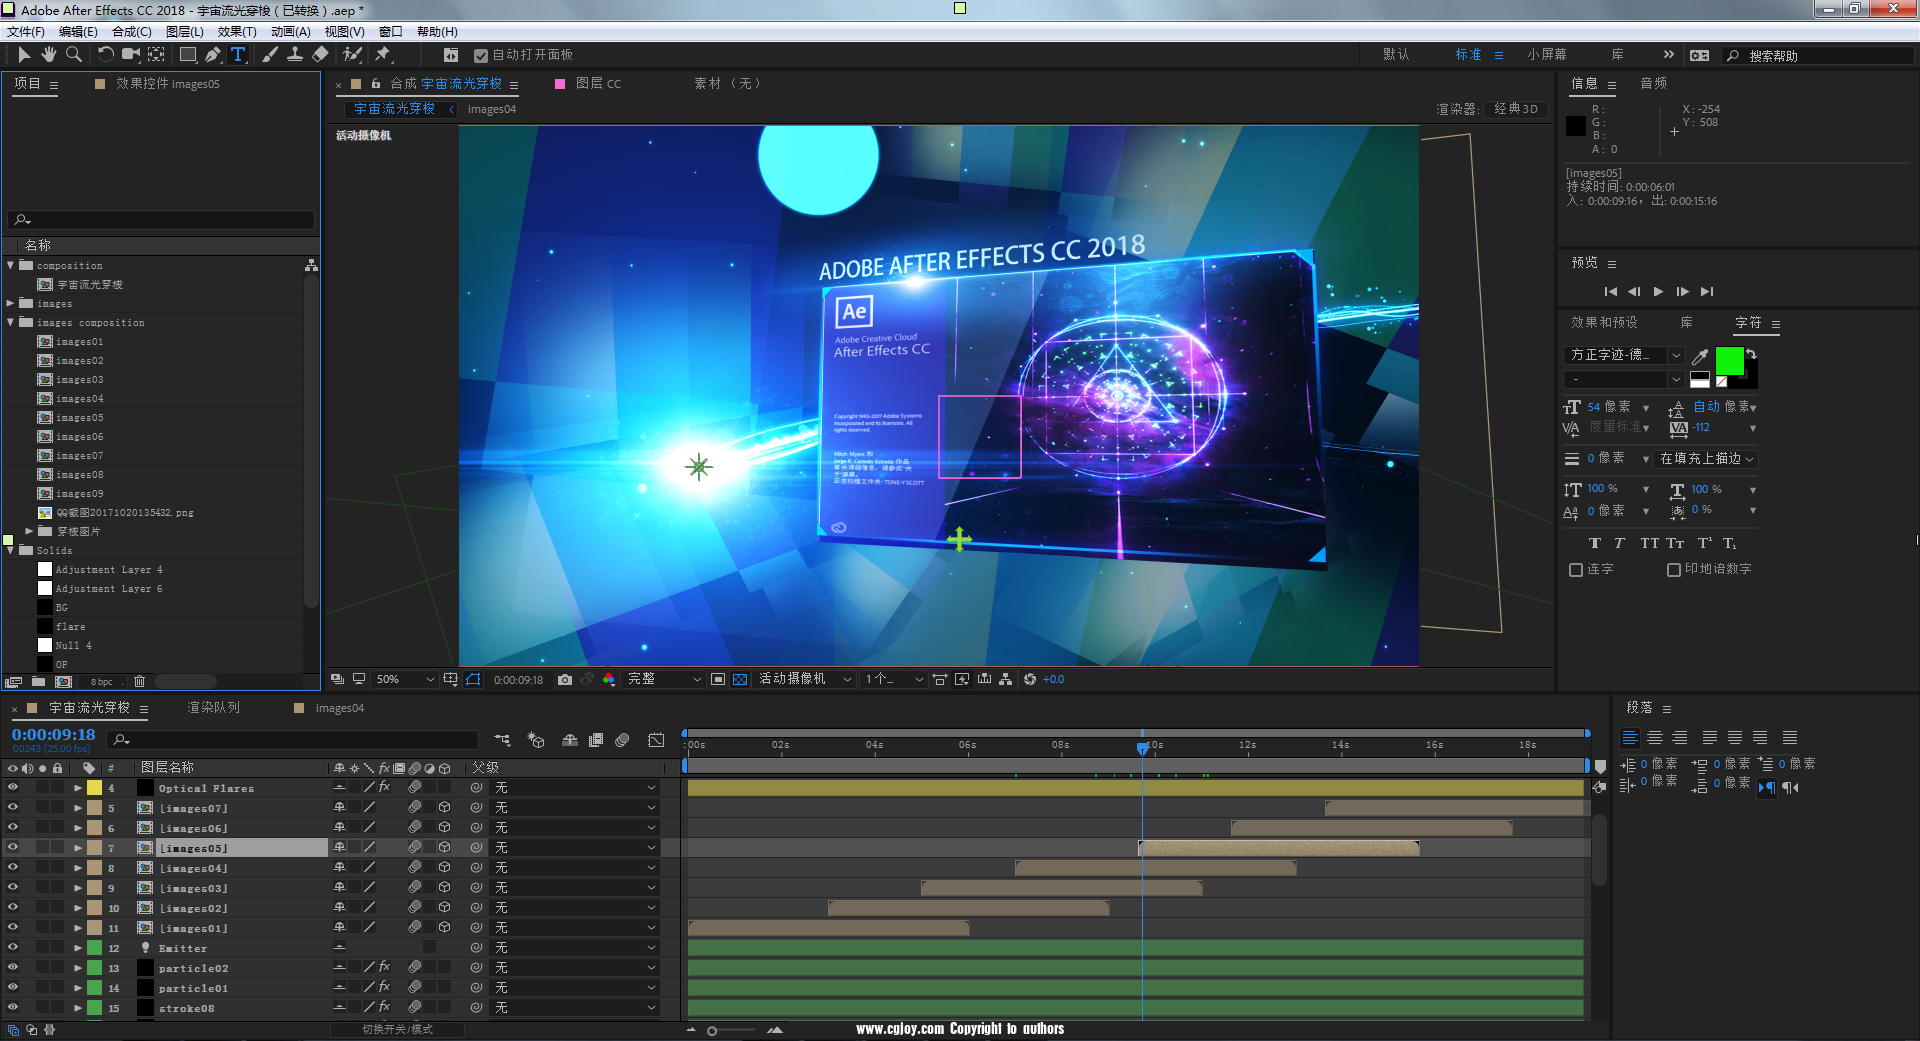 After effects packs. Видеоредактор after Effects. Программа Афтер эффект. Видеоредактор Adobe after Effects. Проекты адоб Афтер эффект.